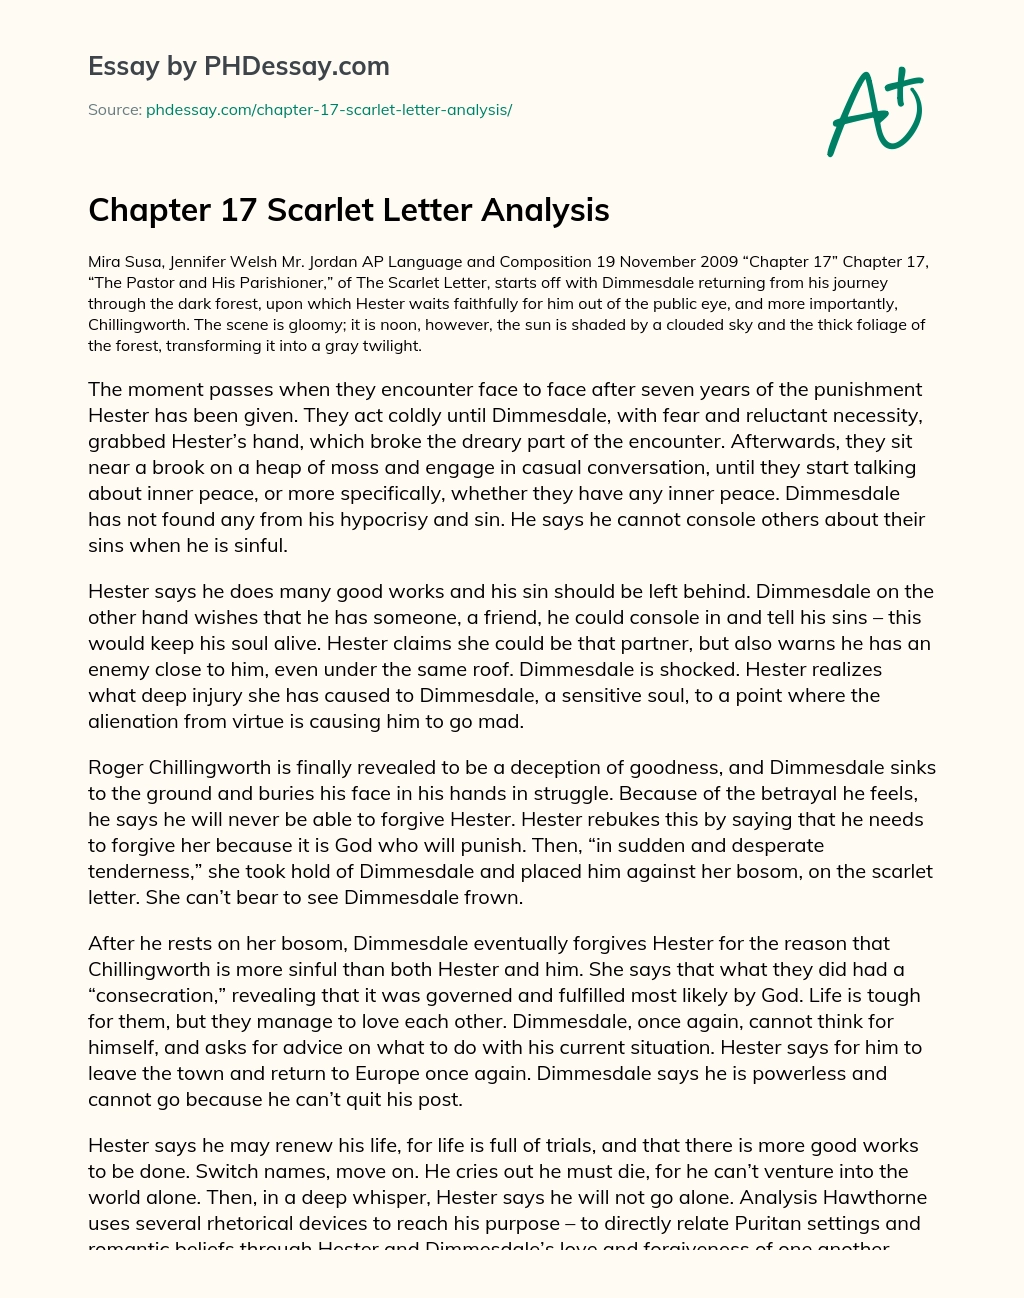 Chapter 17 Scarlet Letter Analysis essay